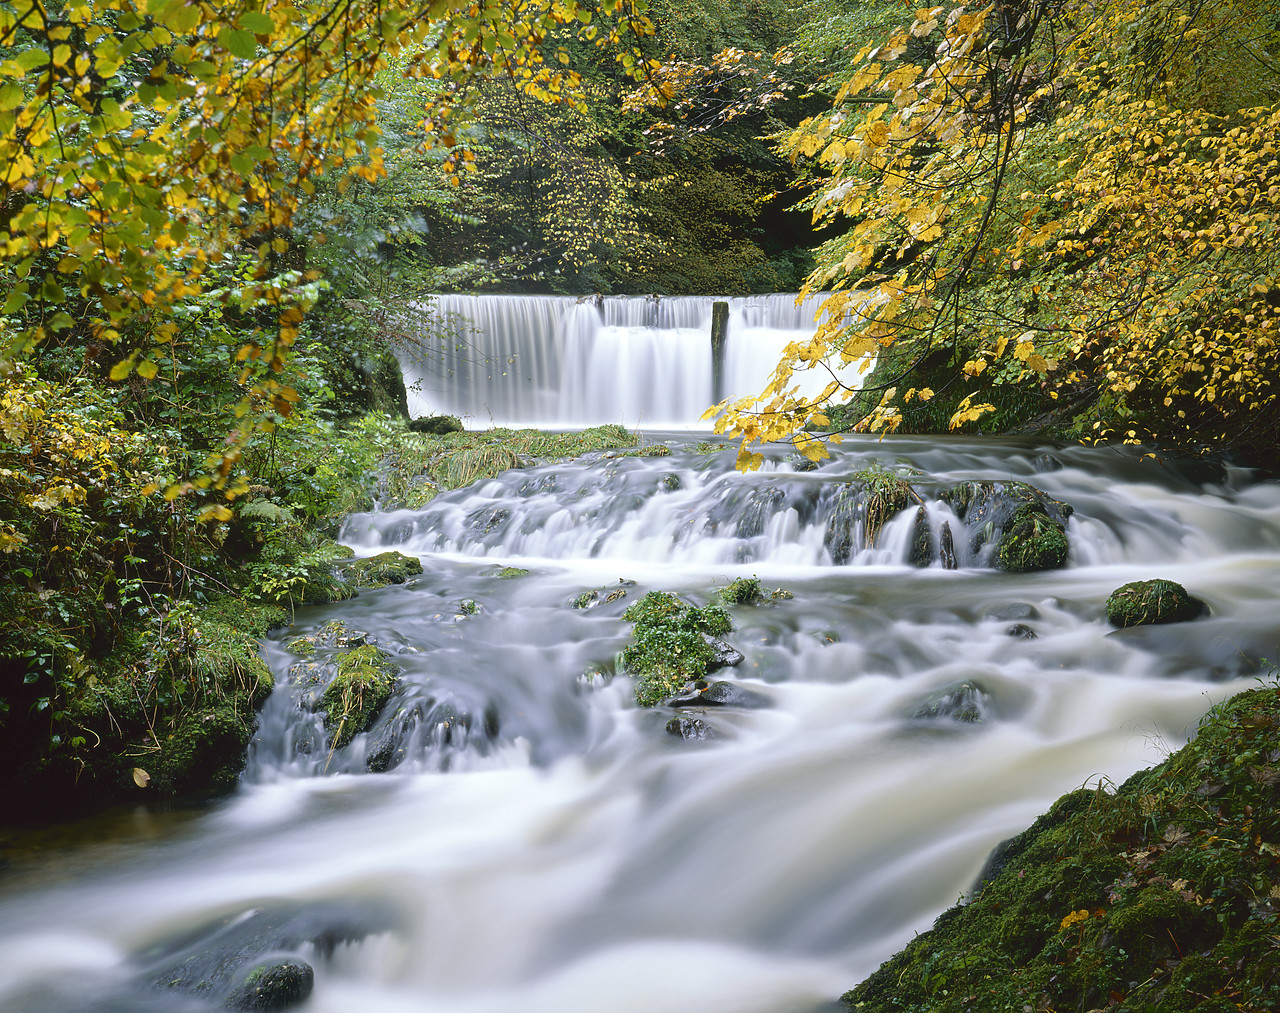 #020763-9 - Stockgyhll Force in Autumn, Lake District National Park, Cumbria, England